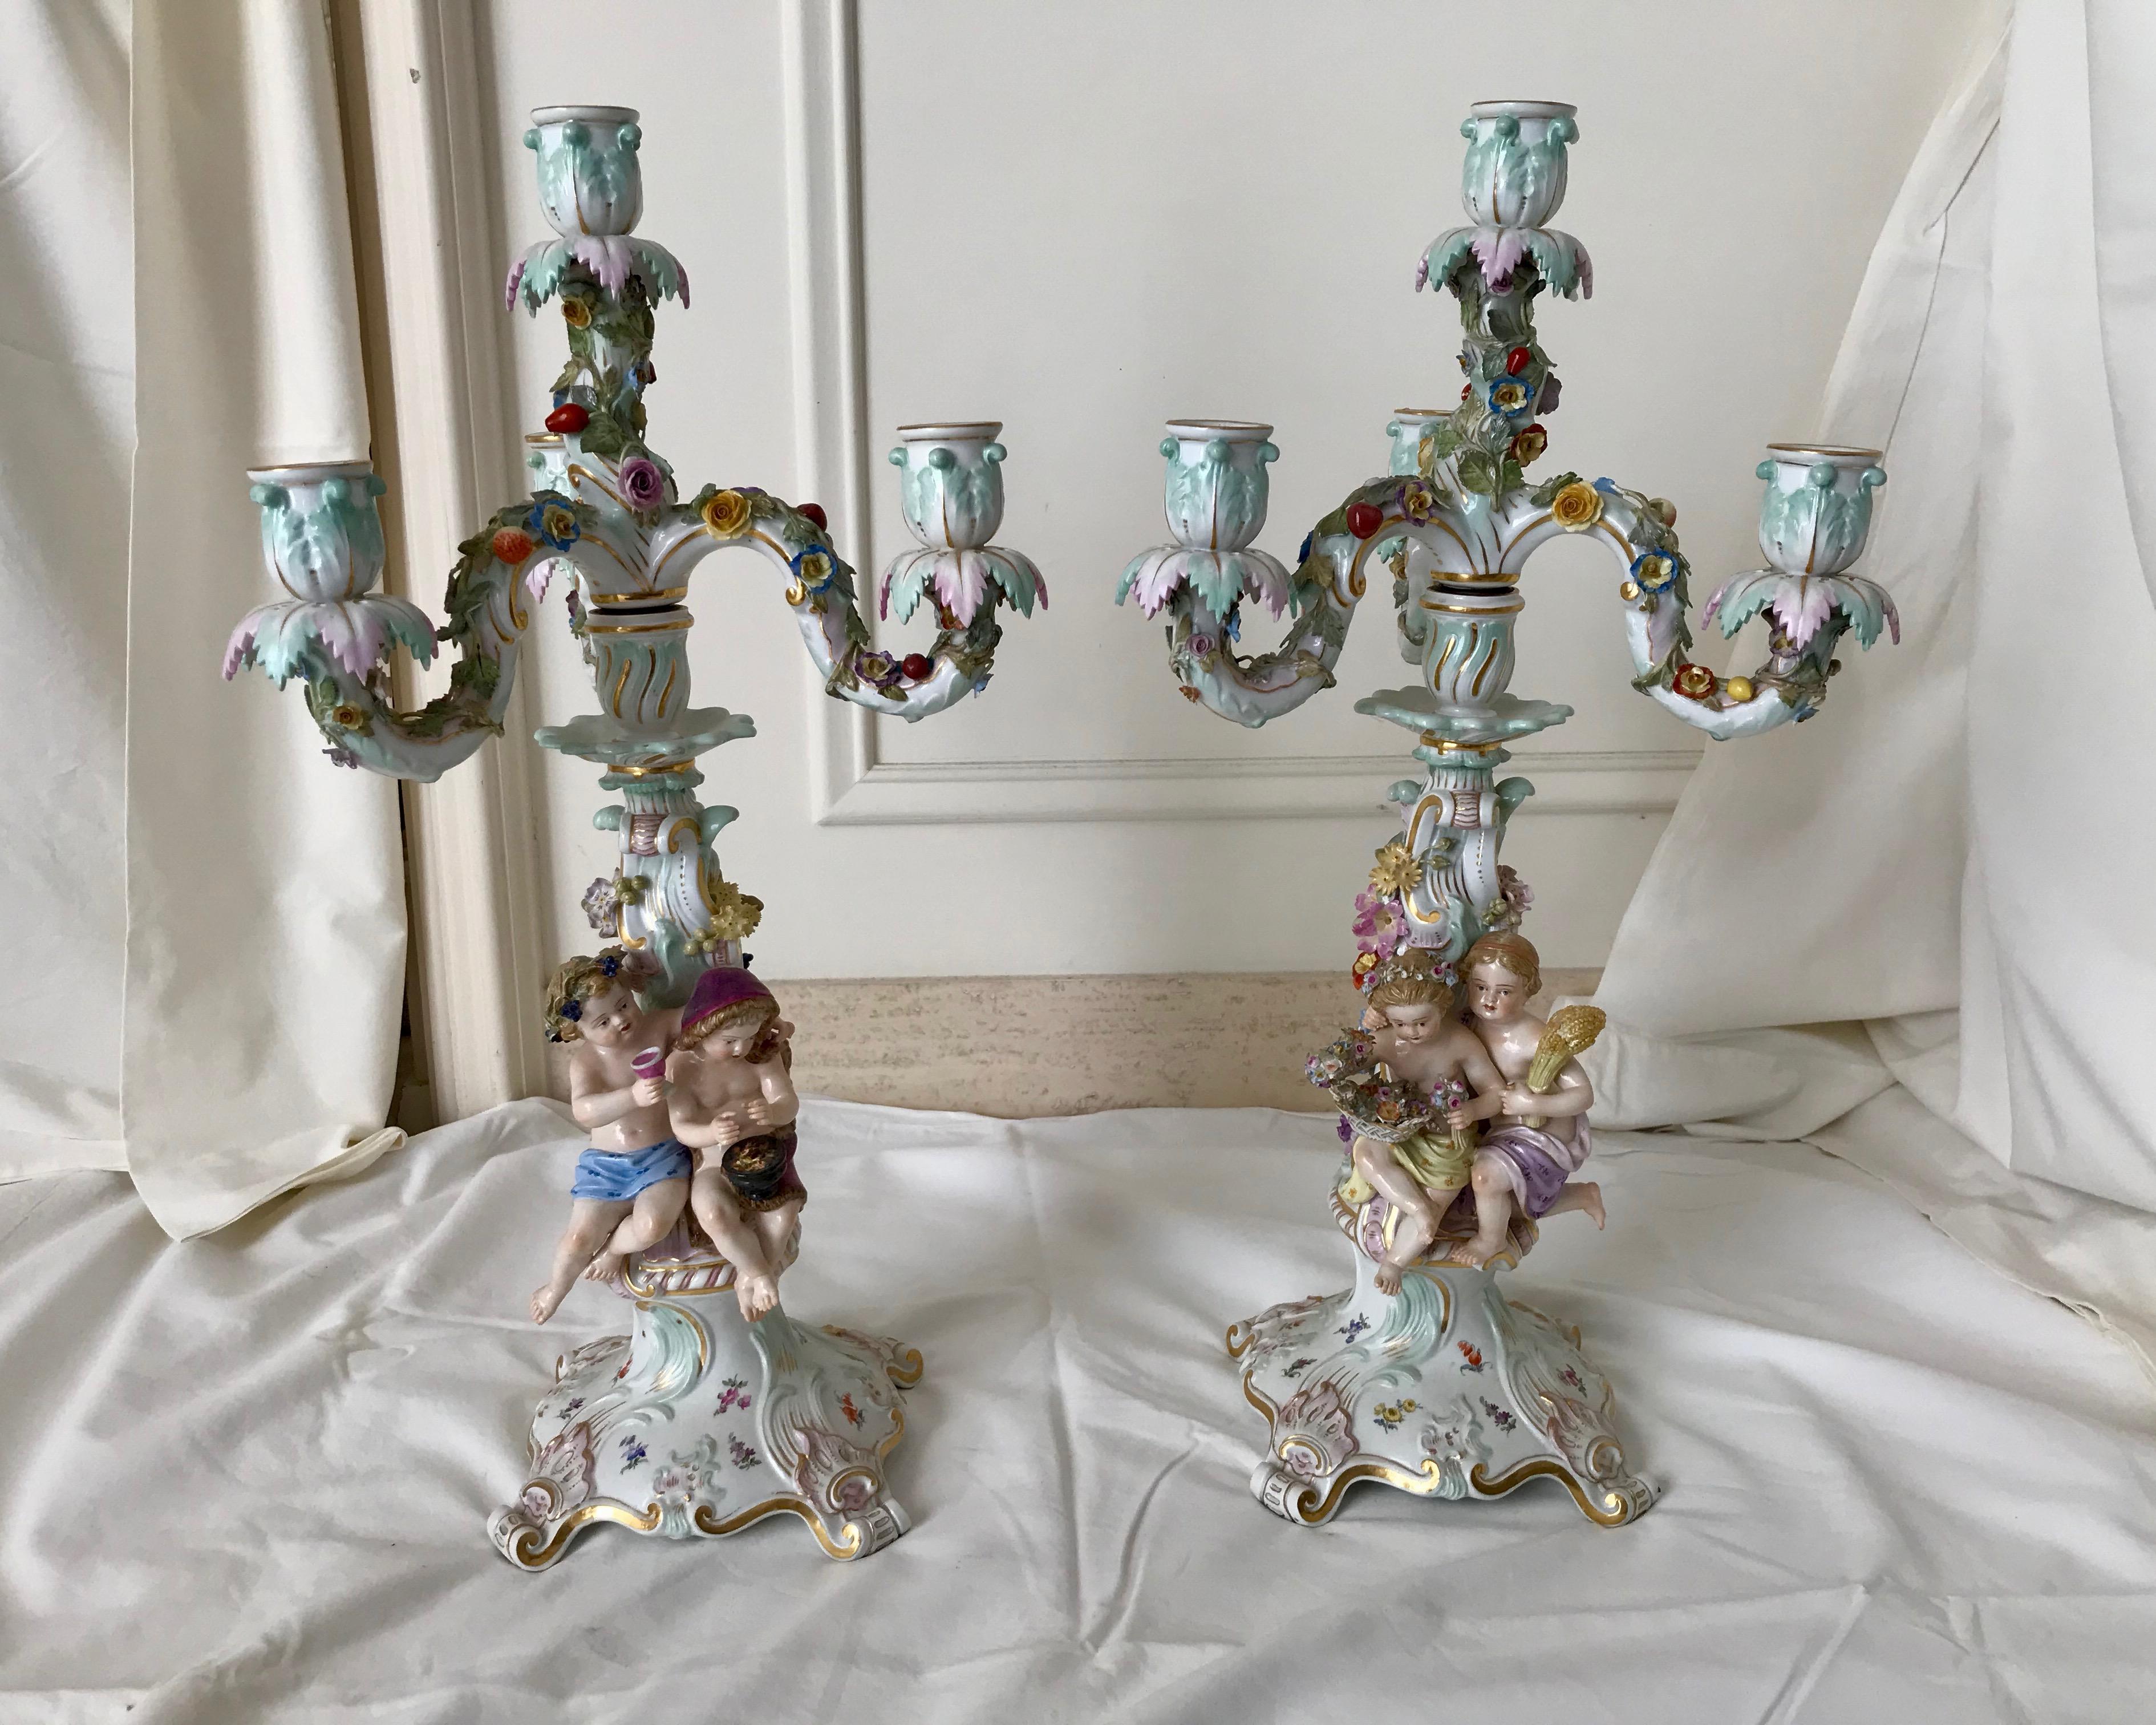 A fine and proper pair with 2 seated children gracing each candelabrum -
one pair facing right - the other children facing left. All are different.
Exquisite quality and detail. Each candelabrum holds 3 candles .
Superior quality.